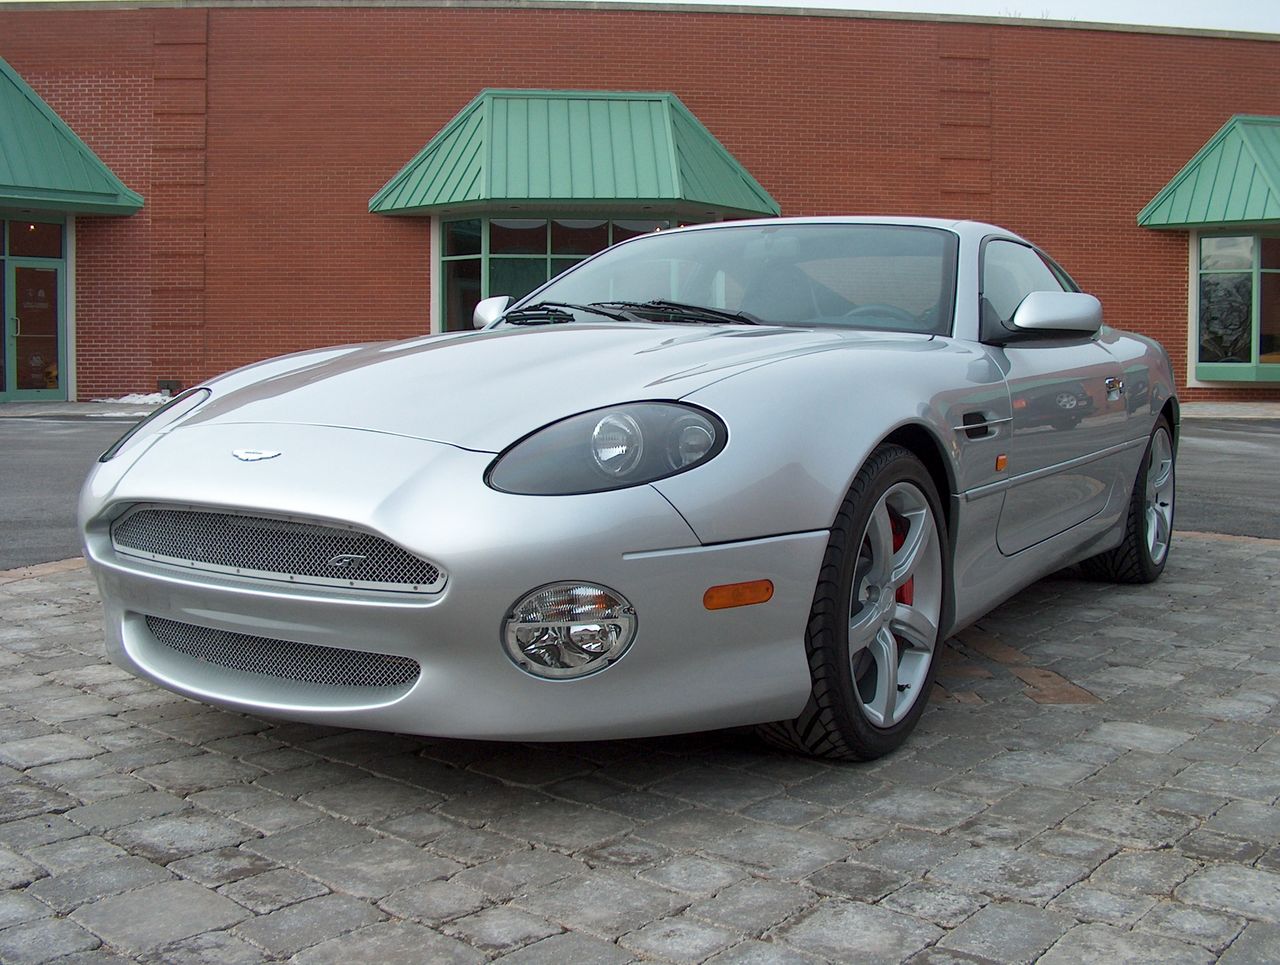 You can vote for this Aston Martin DB7 GT photo